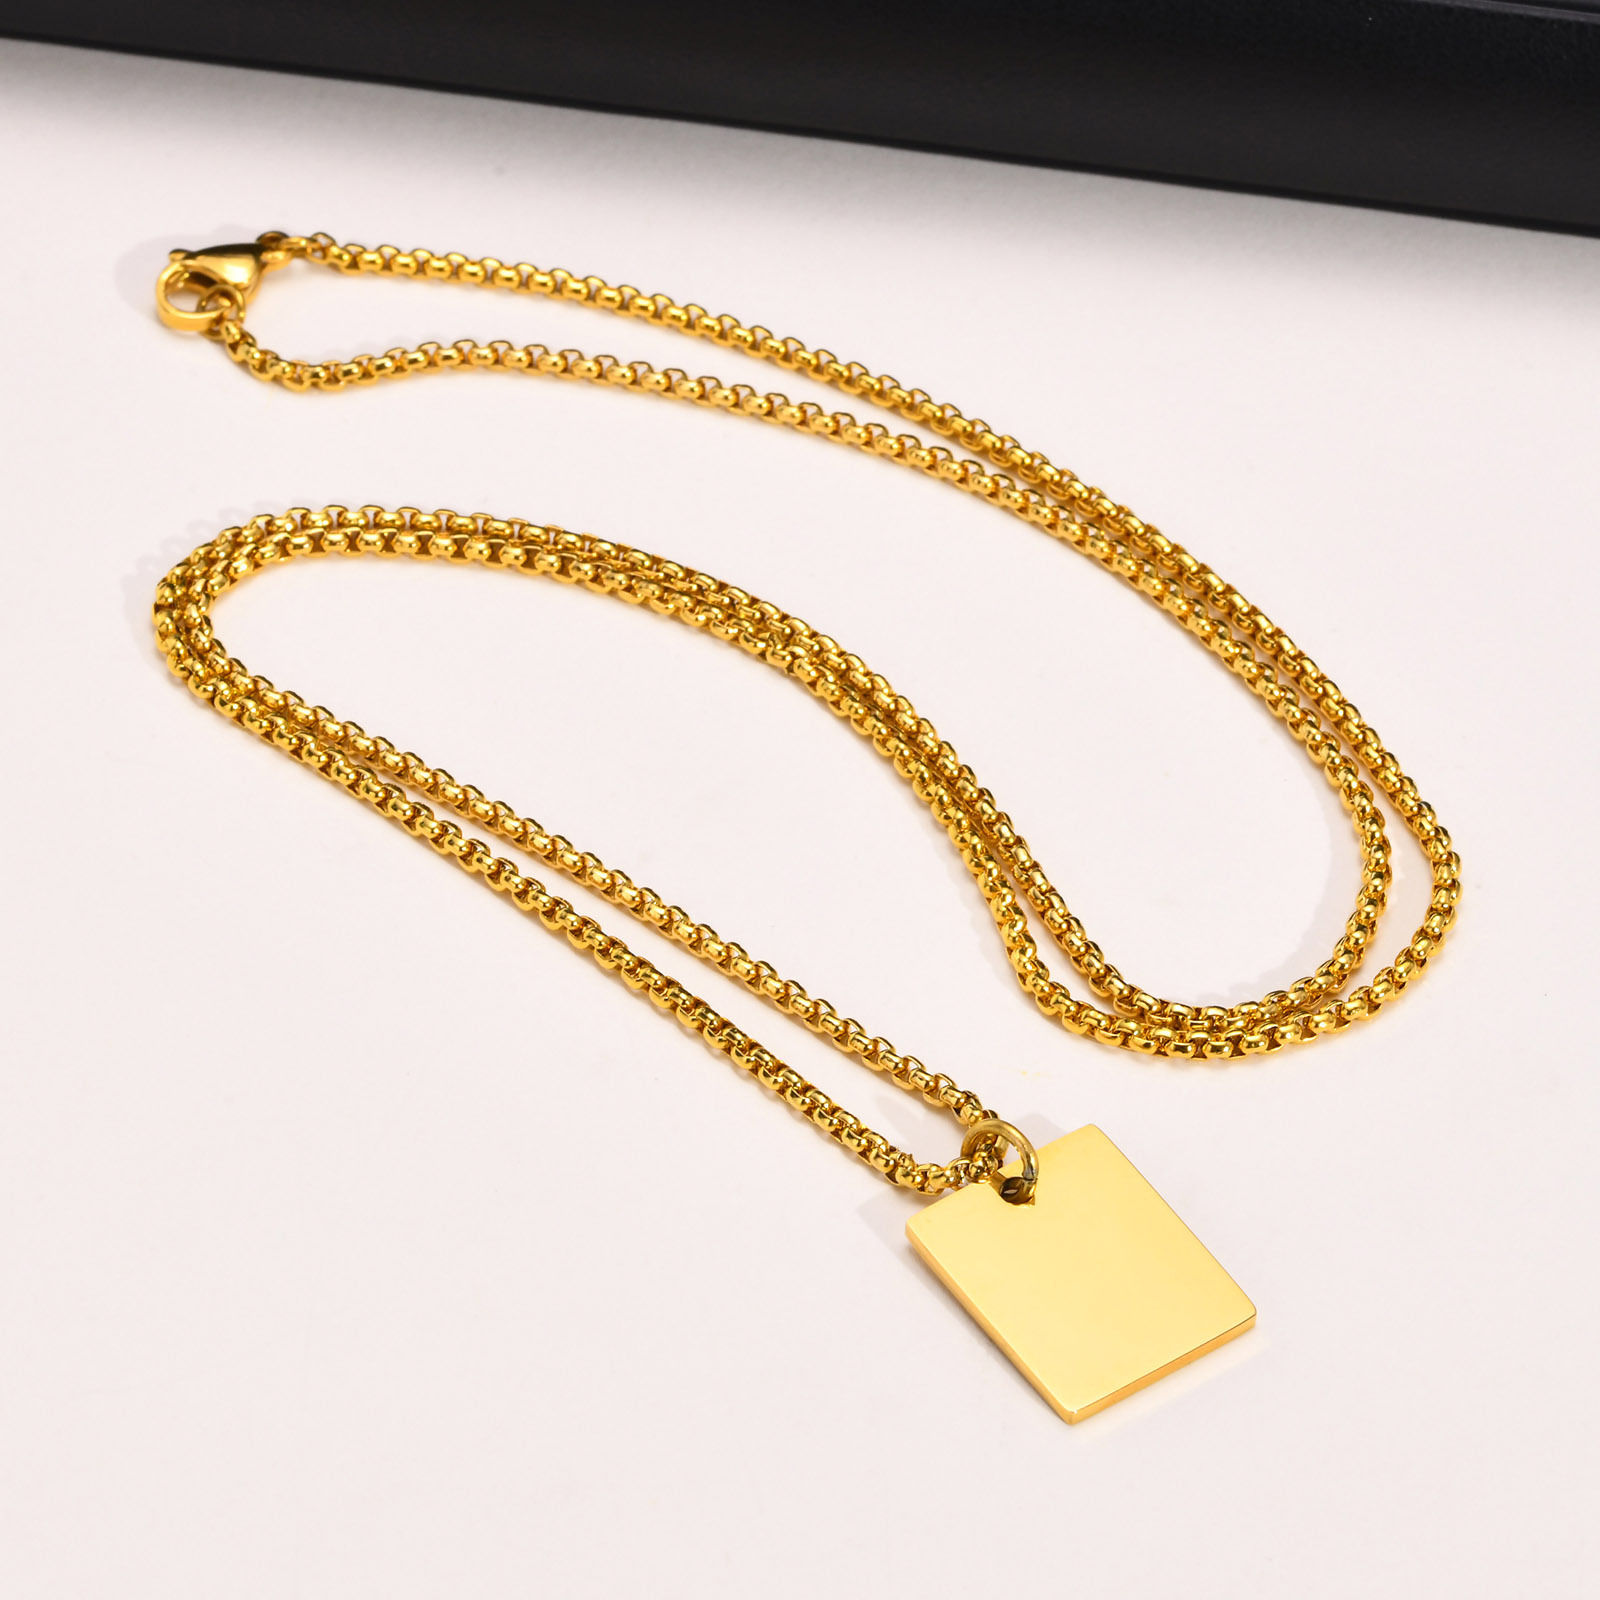 4:Gold Pendant with chain